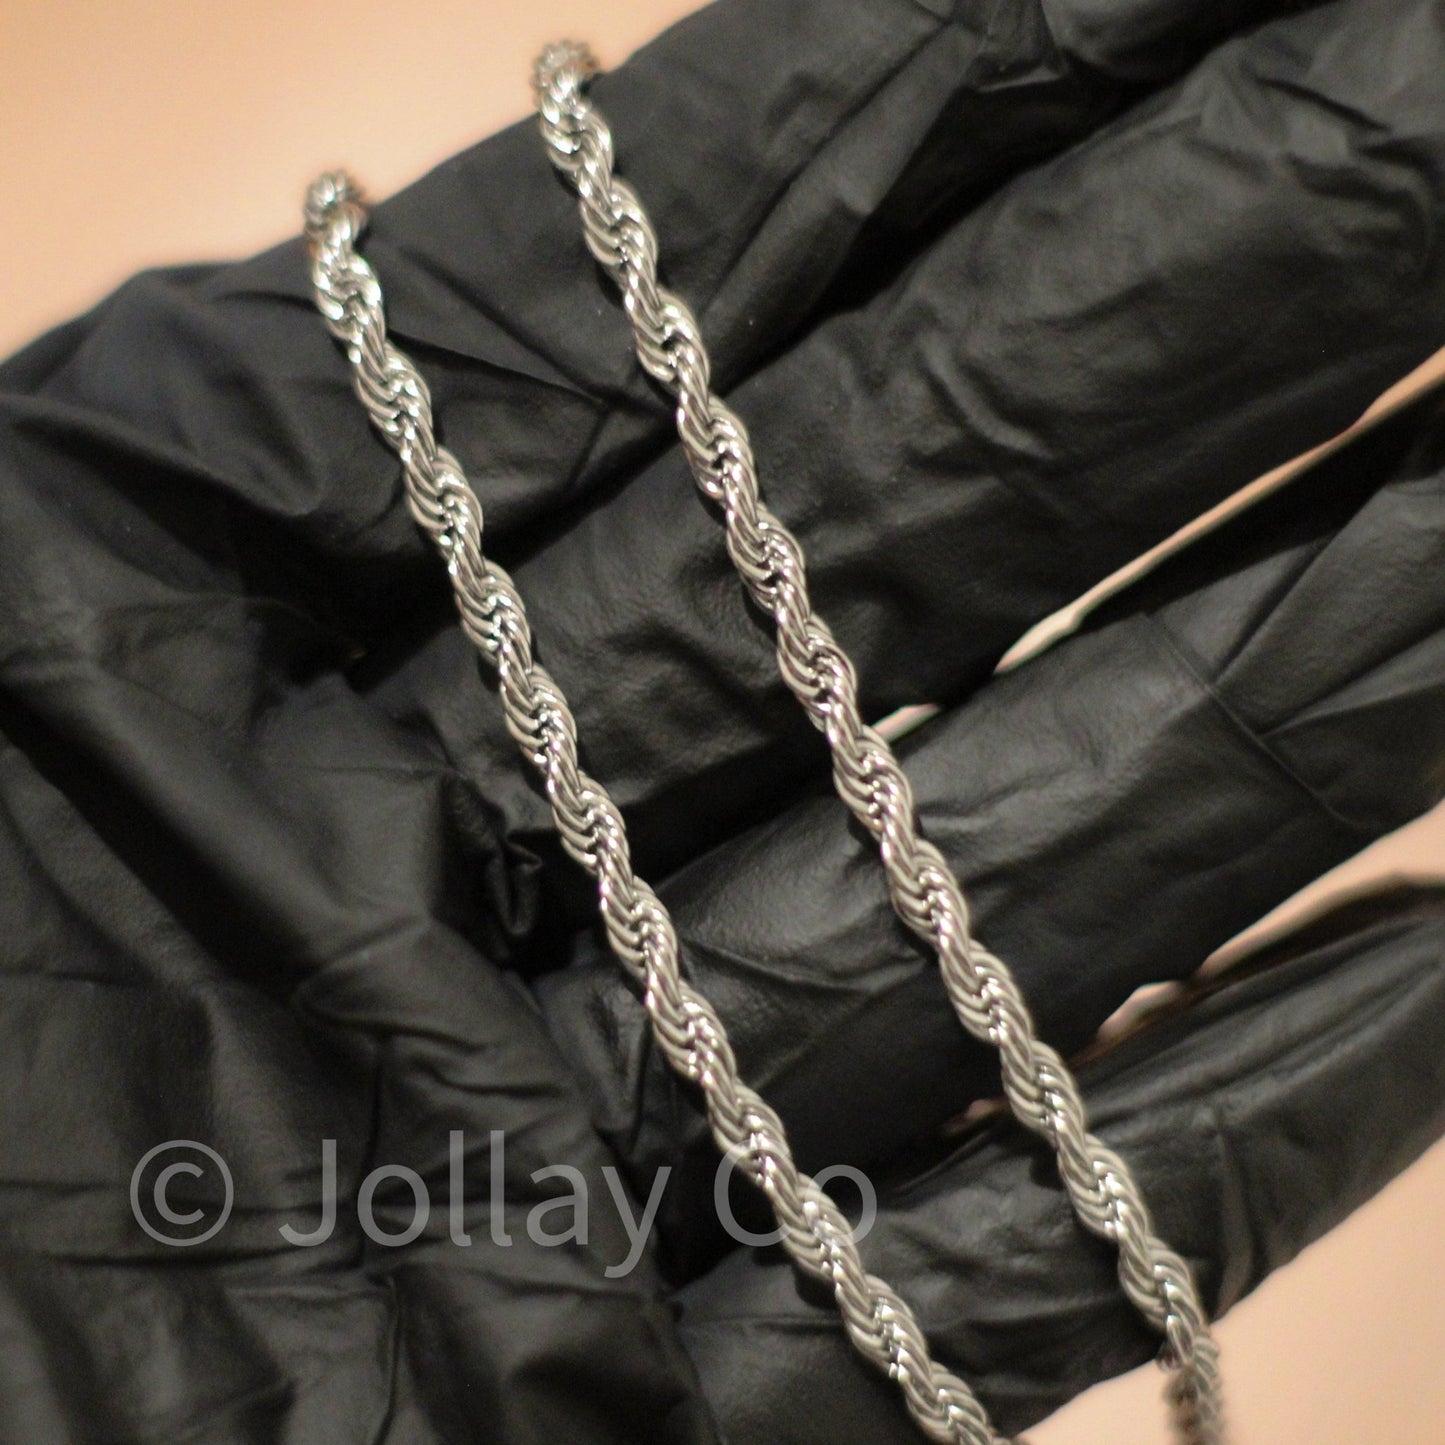 4mm White Gold Rope Chains - JOLLAY.CO